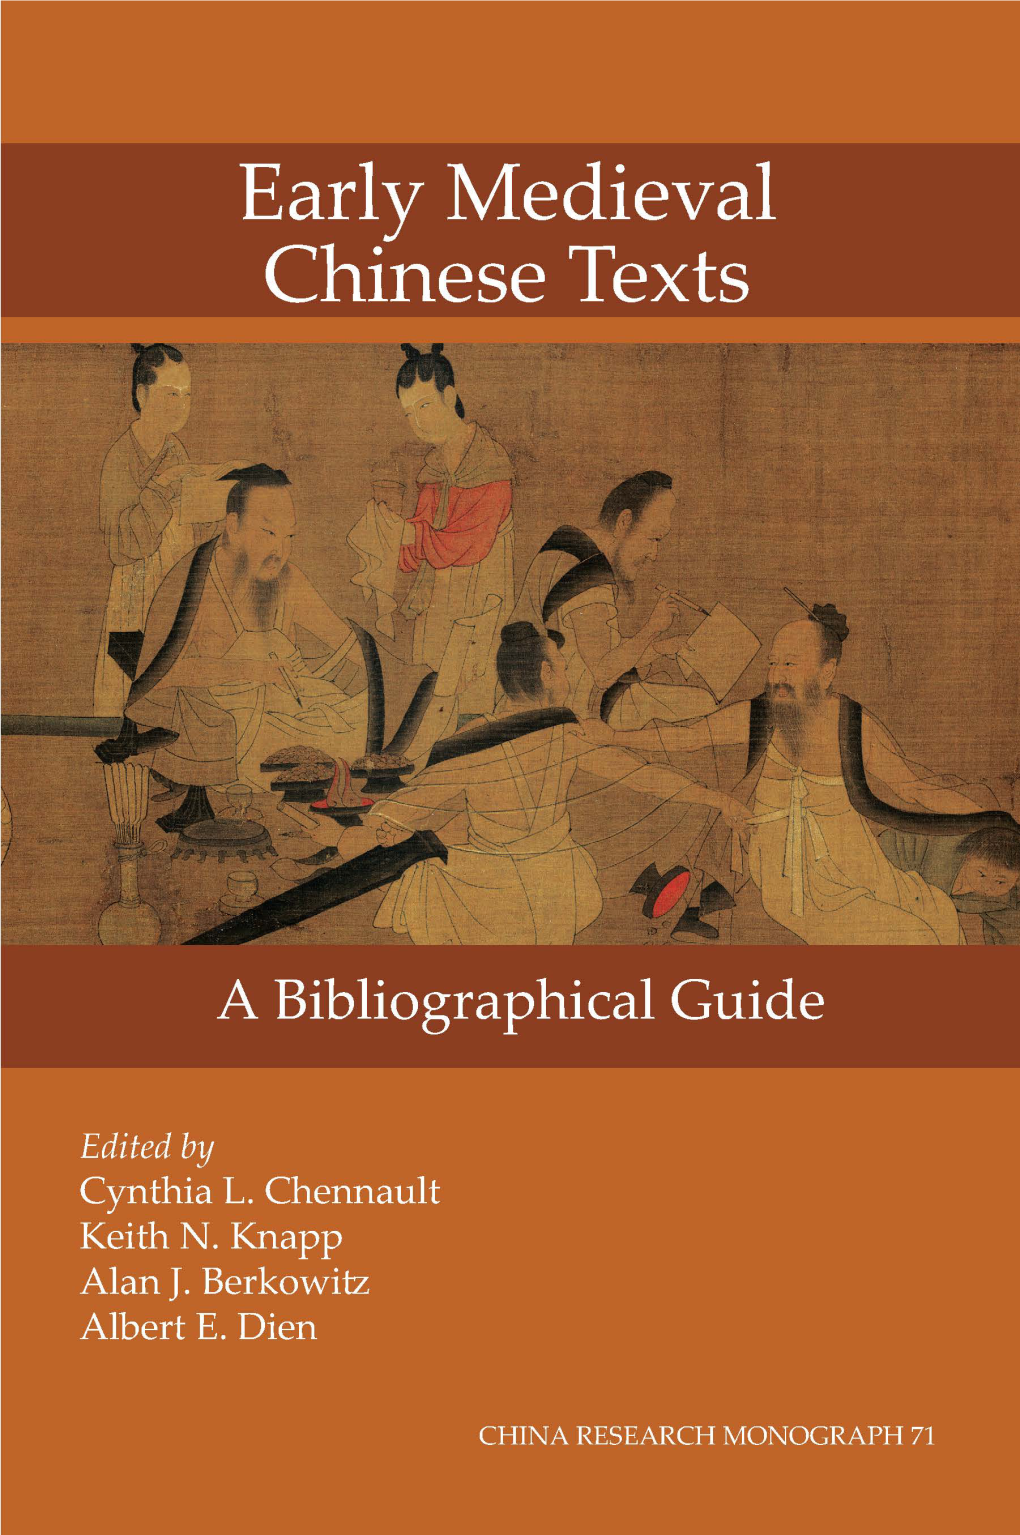 Early Medieval Chinese Texts: a Bibliographical Guide